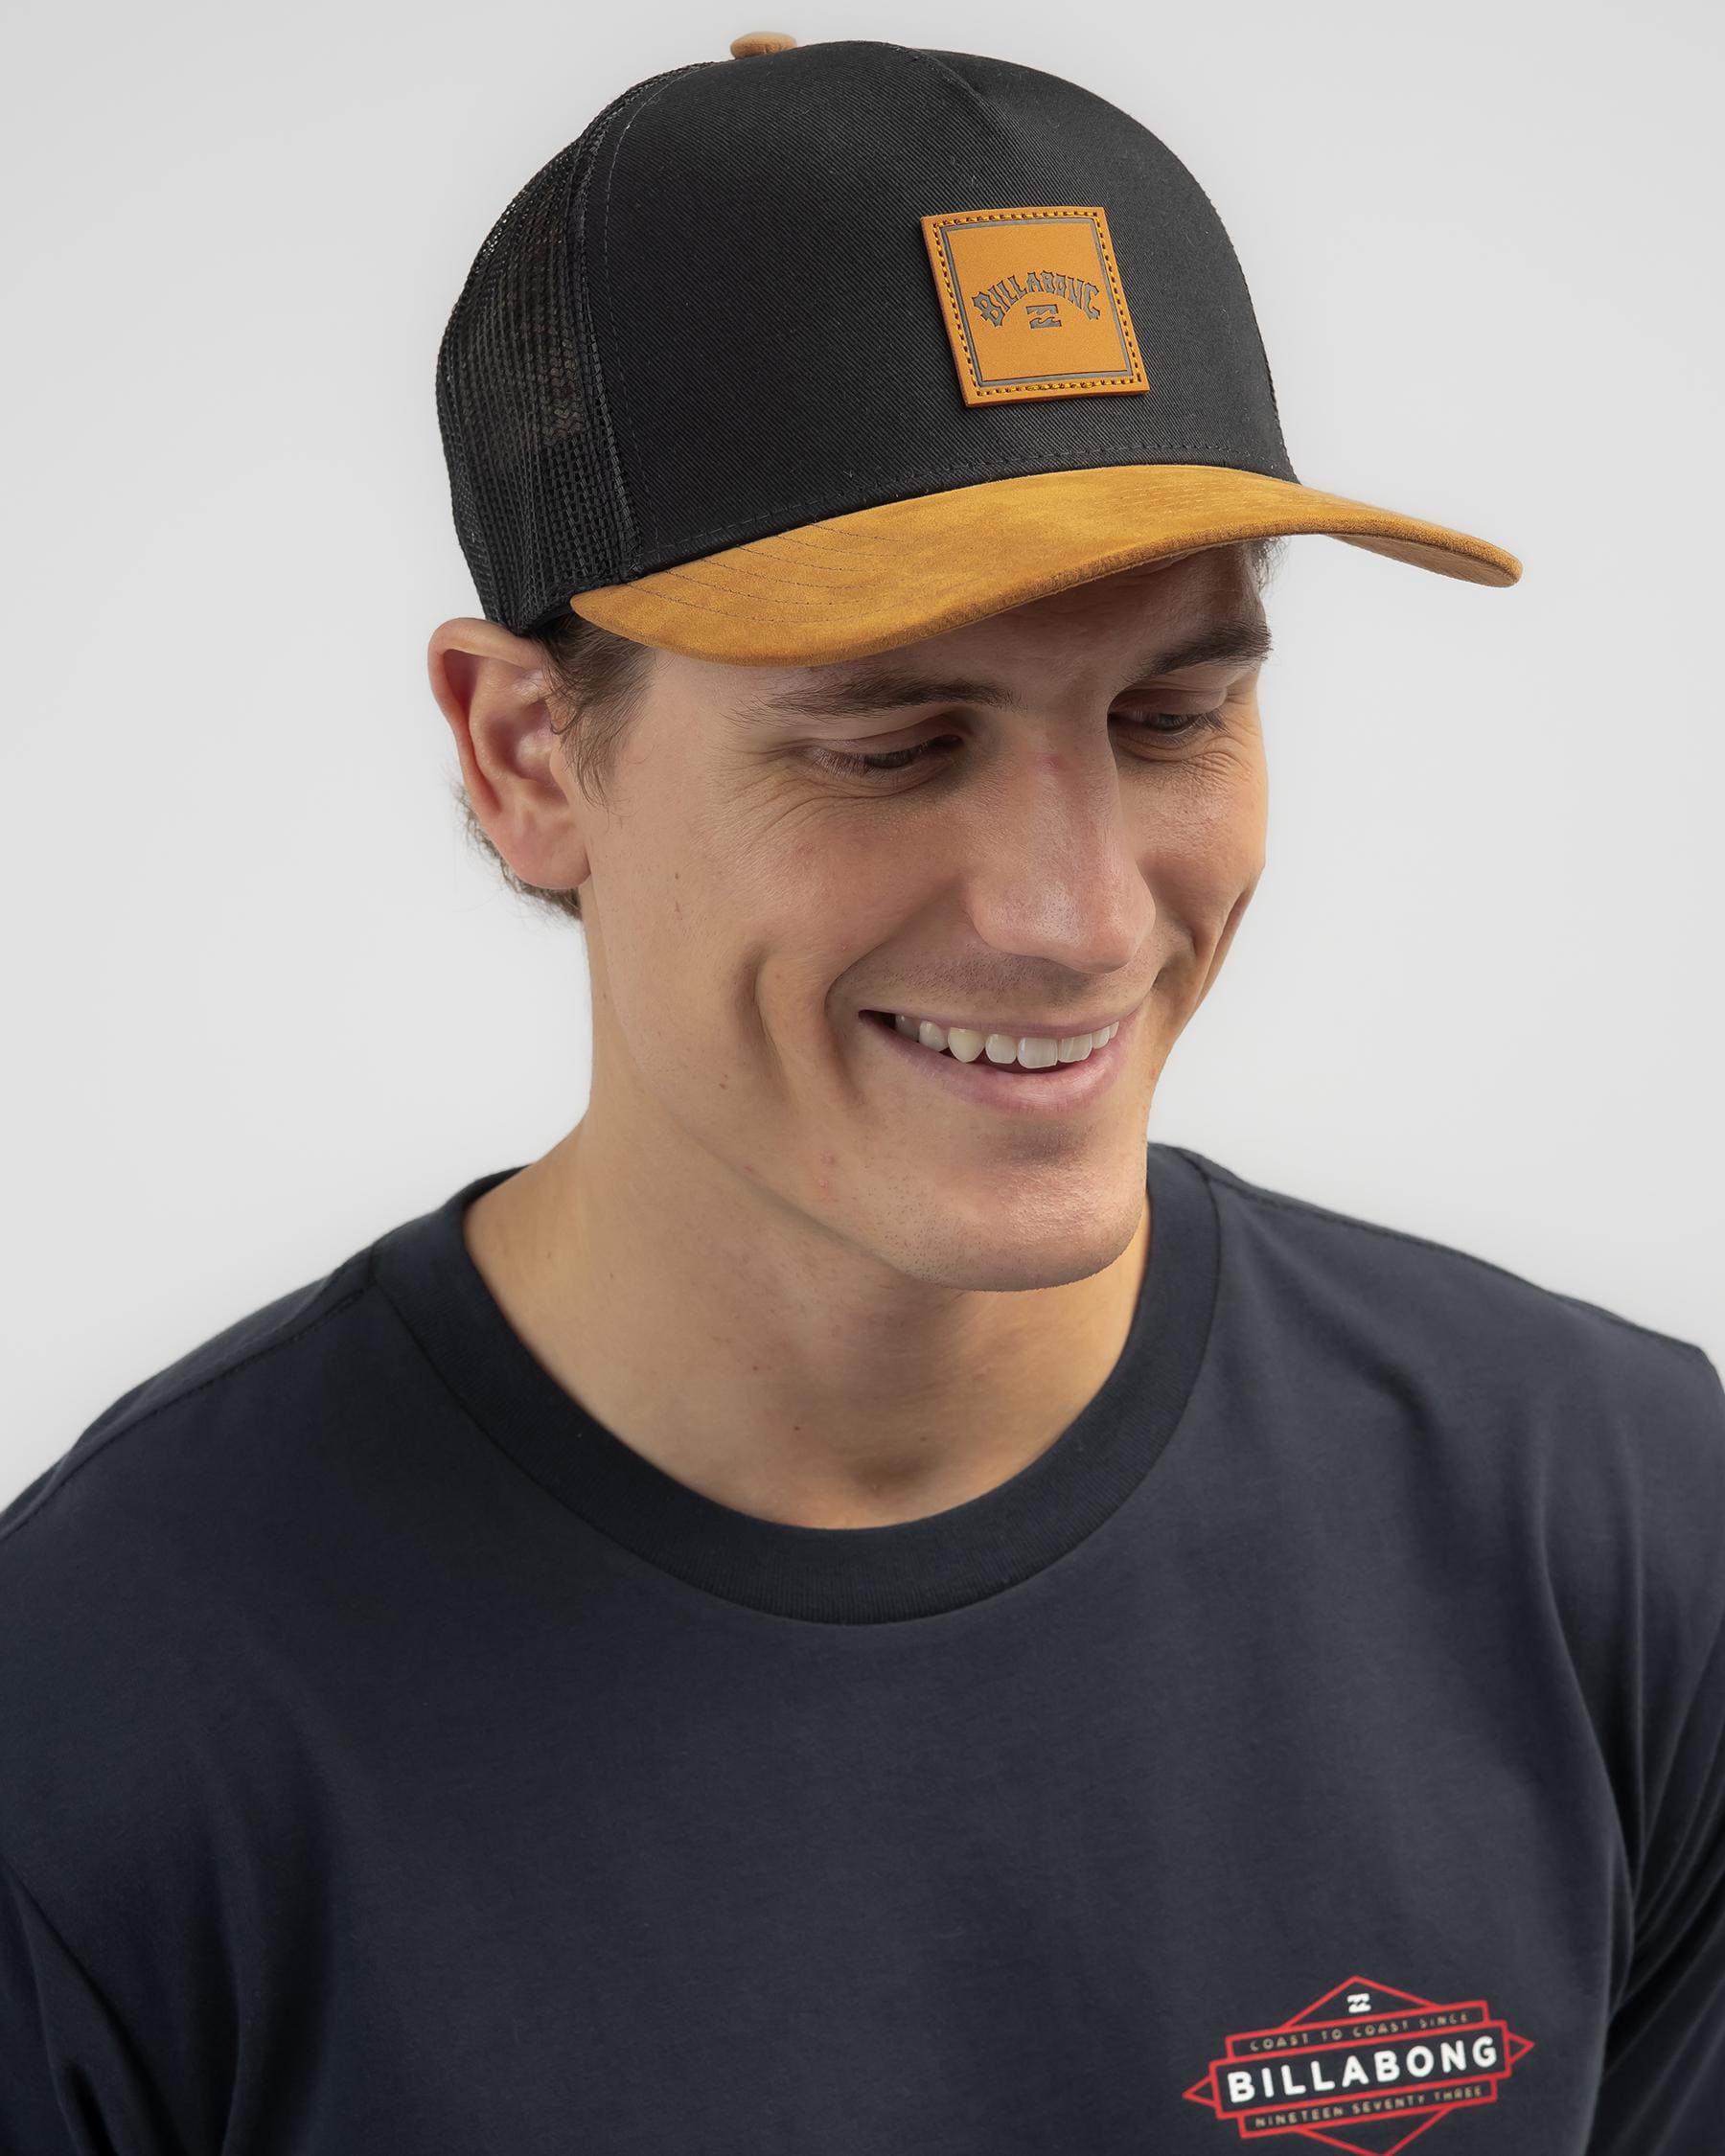 Billabong Stacked Trucker Cap In Black/tan - FREE* Shipping & Easy Returns  - City Beach United States